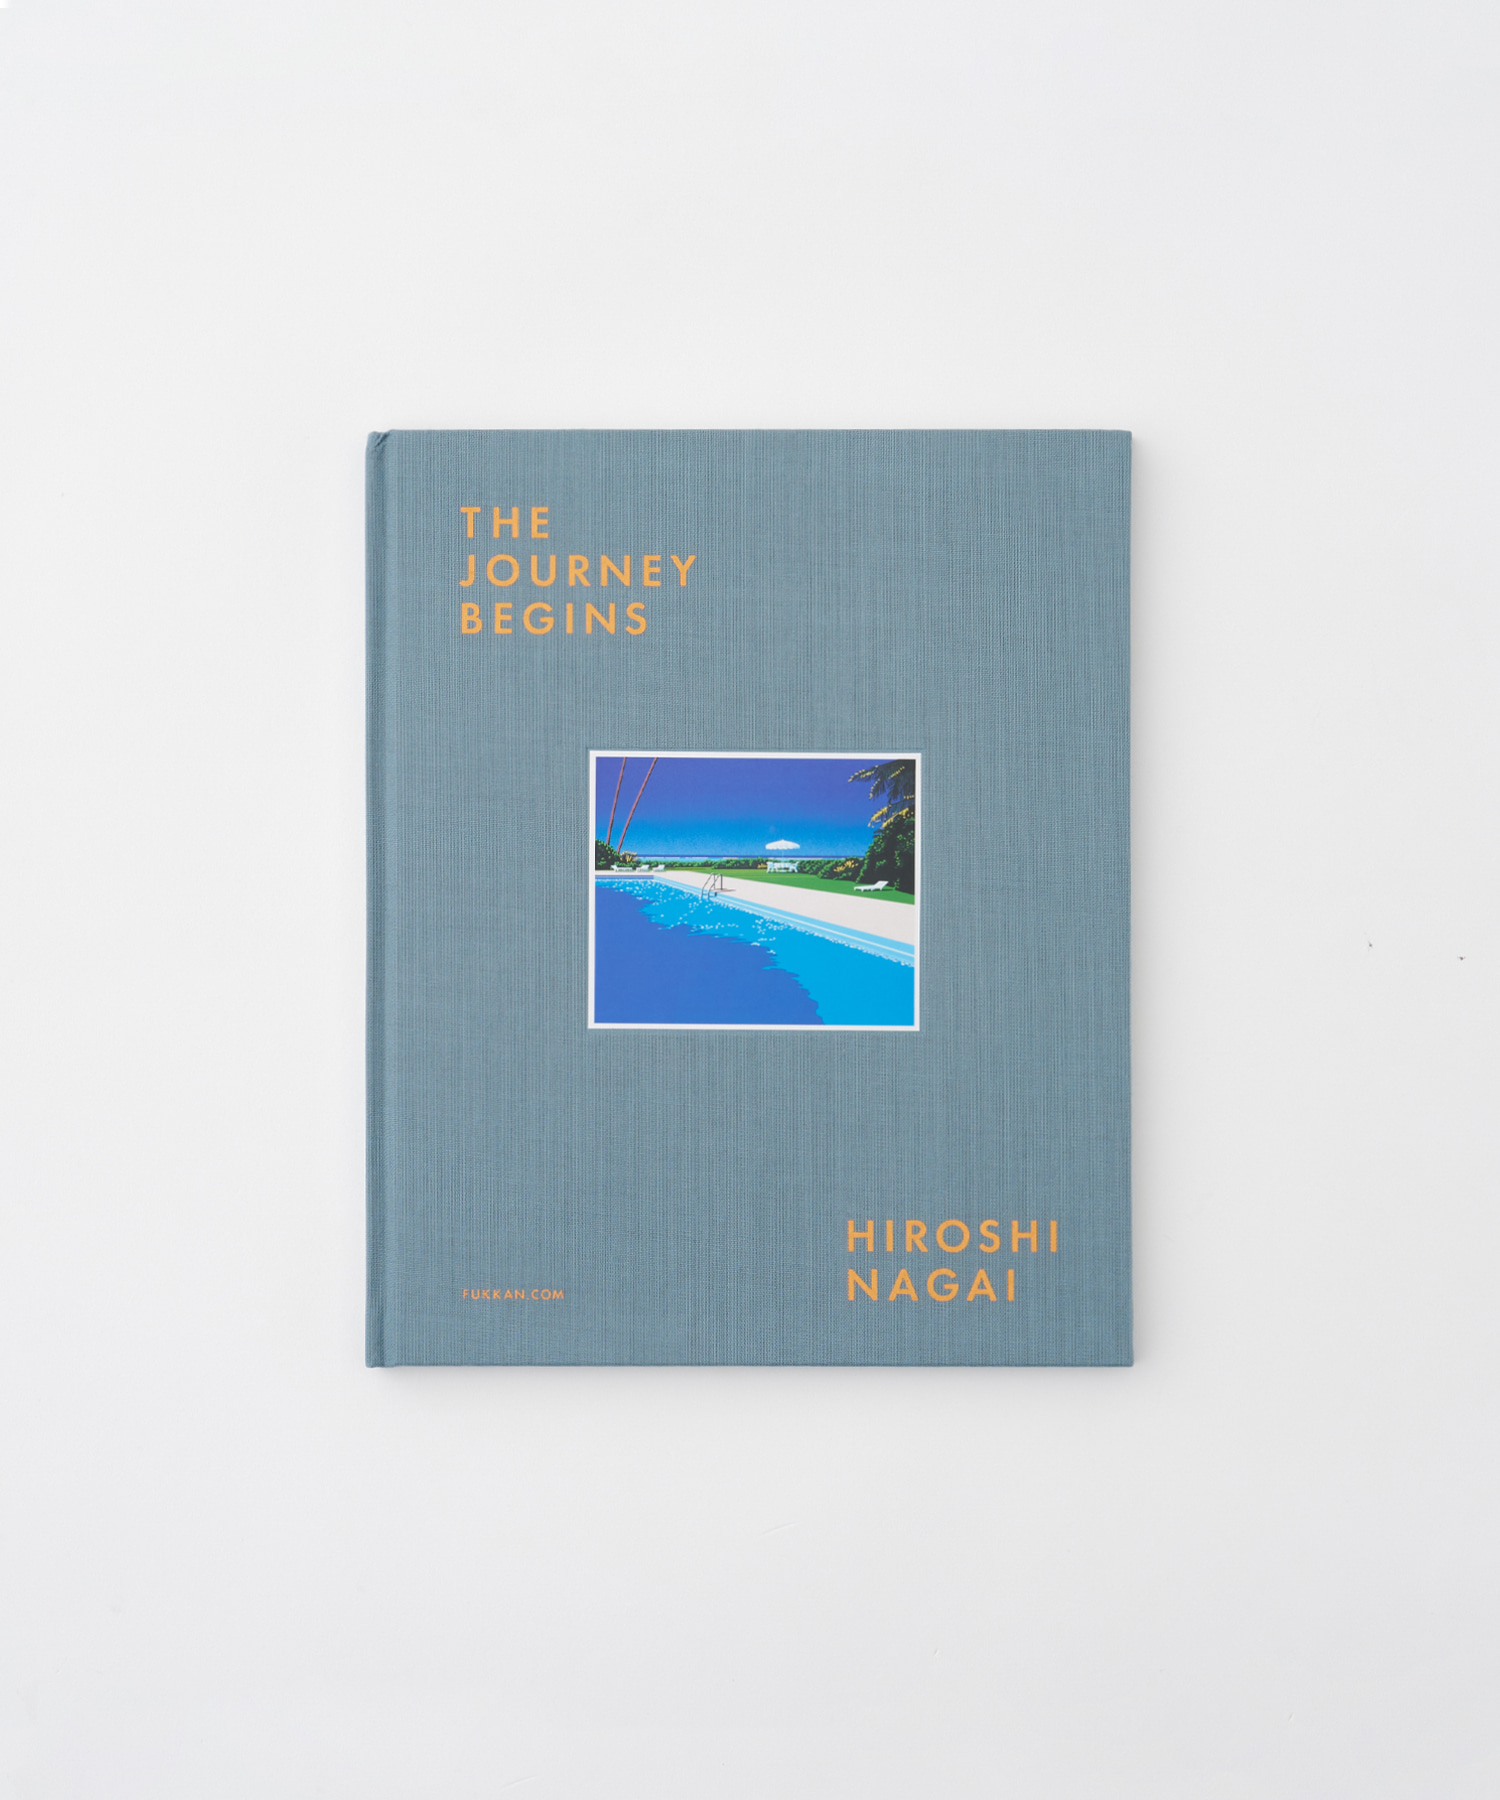 THE JOURNEY BEGINS Hiroshi Nagai (Limited Fabric Cover Edition)